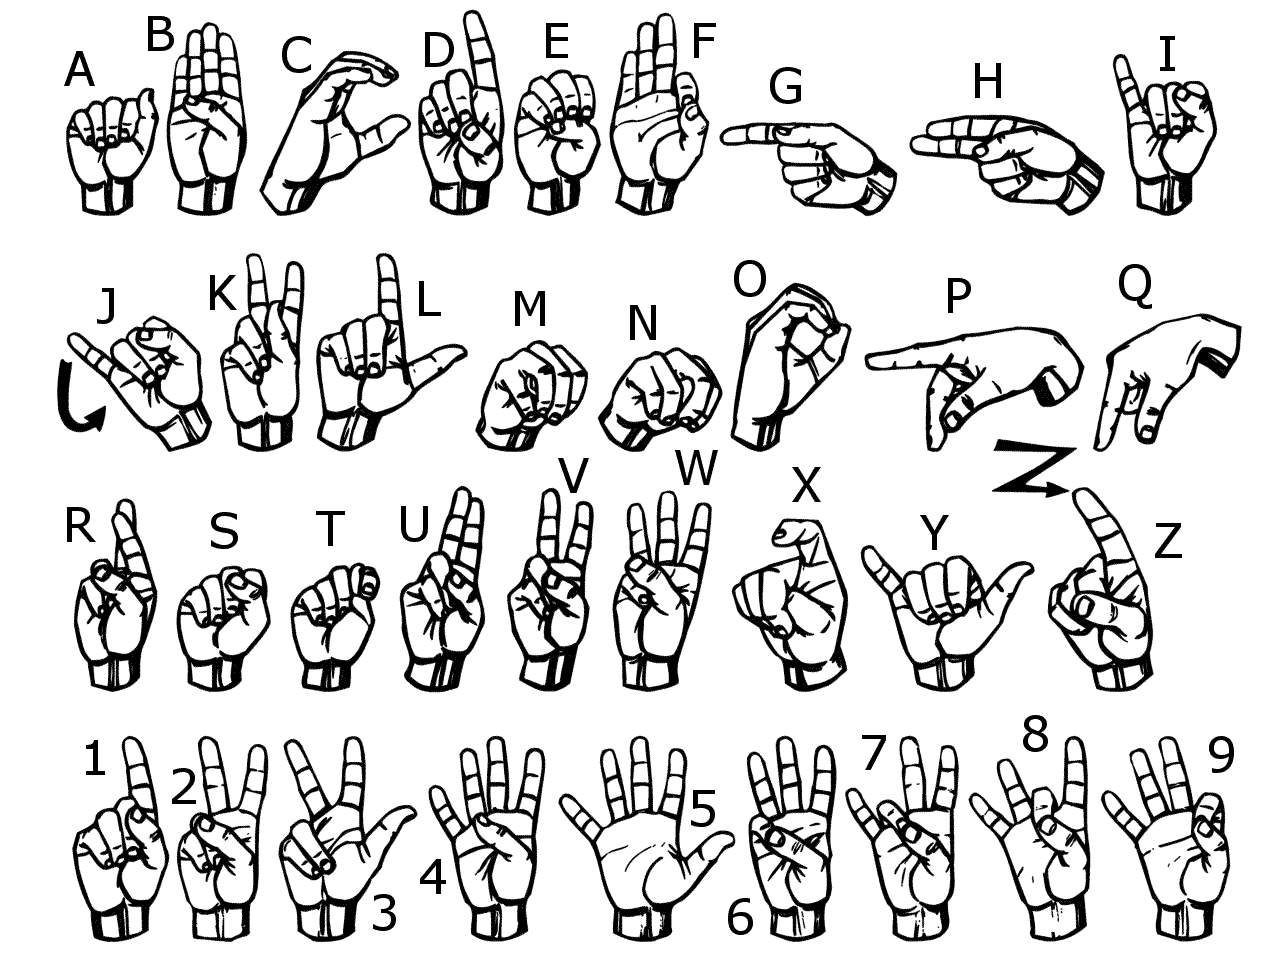 Sign Language Alphabet - ASL - LearnSigns